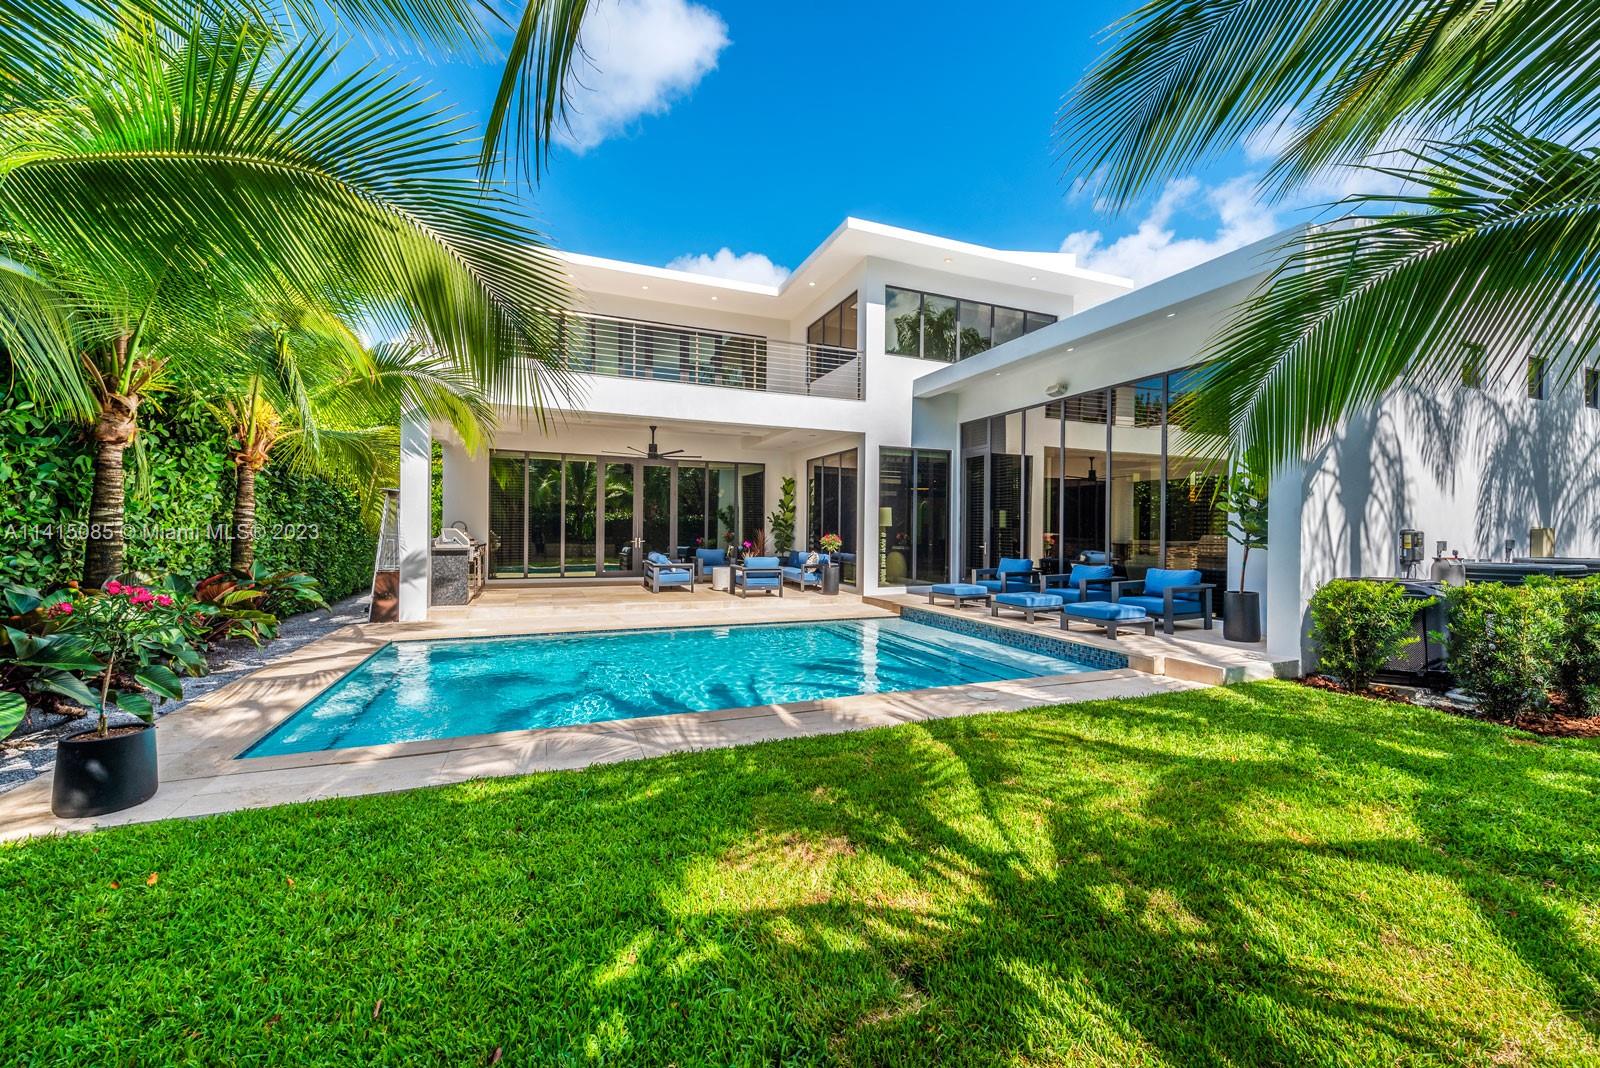 Property for Sale at 1200 Hardee Rd, Coral Gables, Broward County, Florida - Bedrooms: 5 
Bathrooms: 5  - $4,950,000